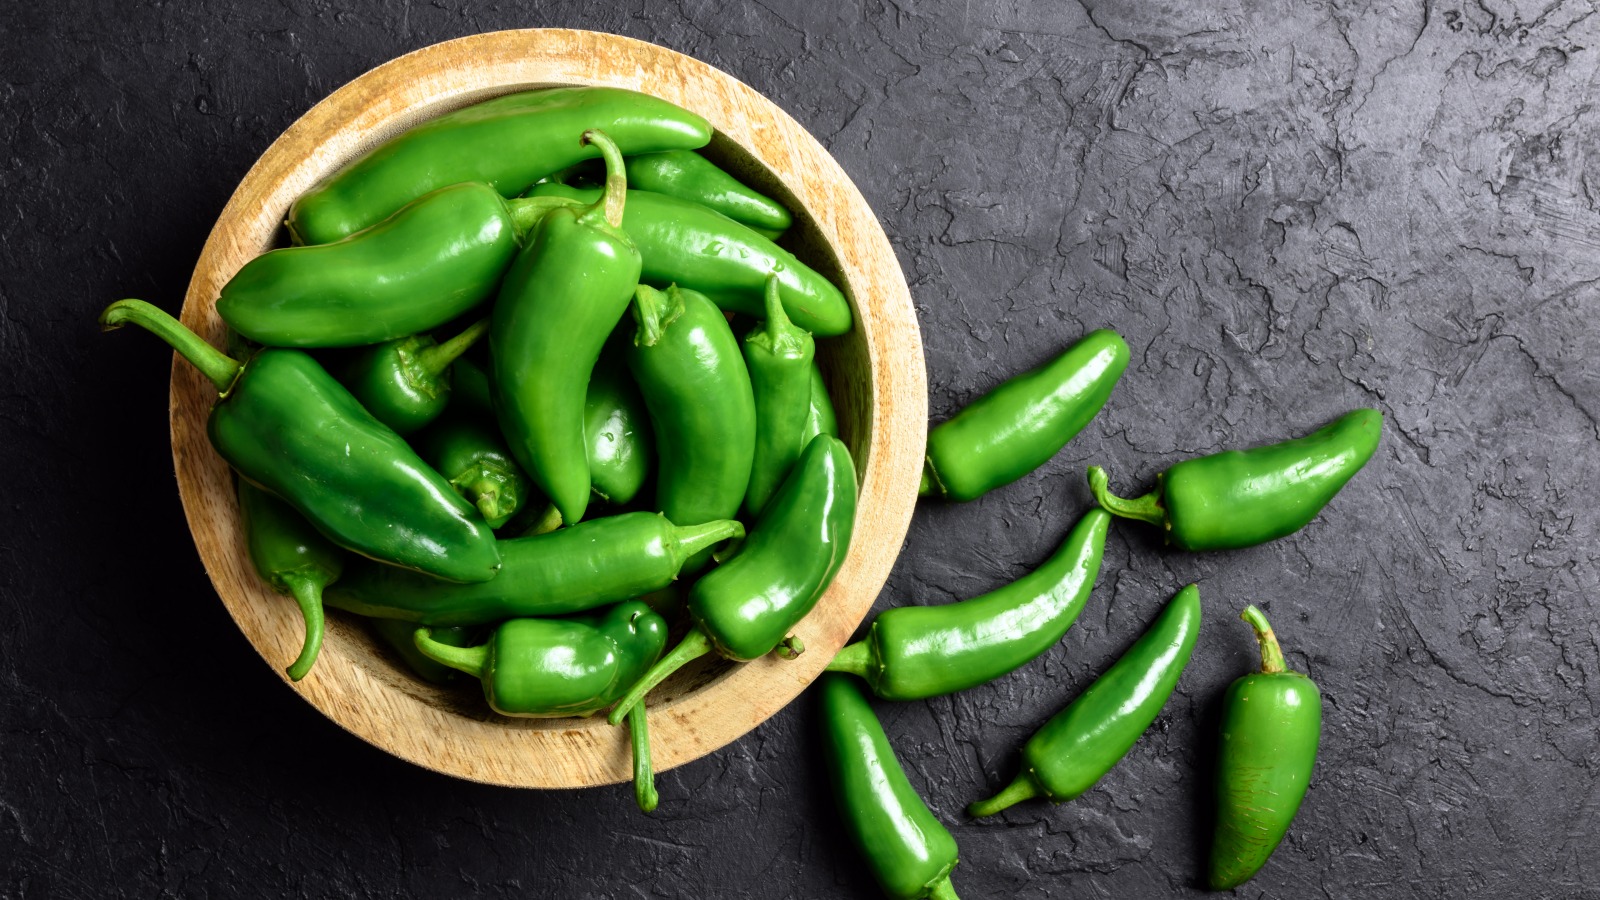 How to Check for the Hotness of Jalapeños